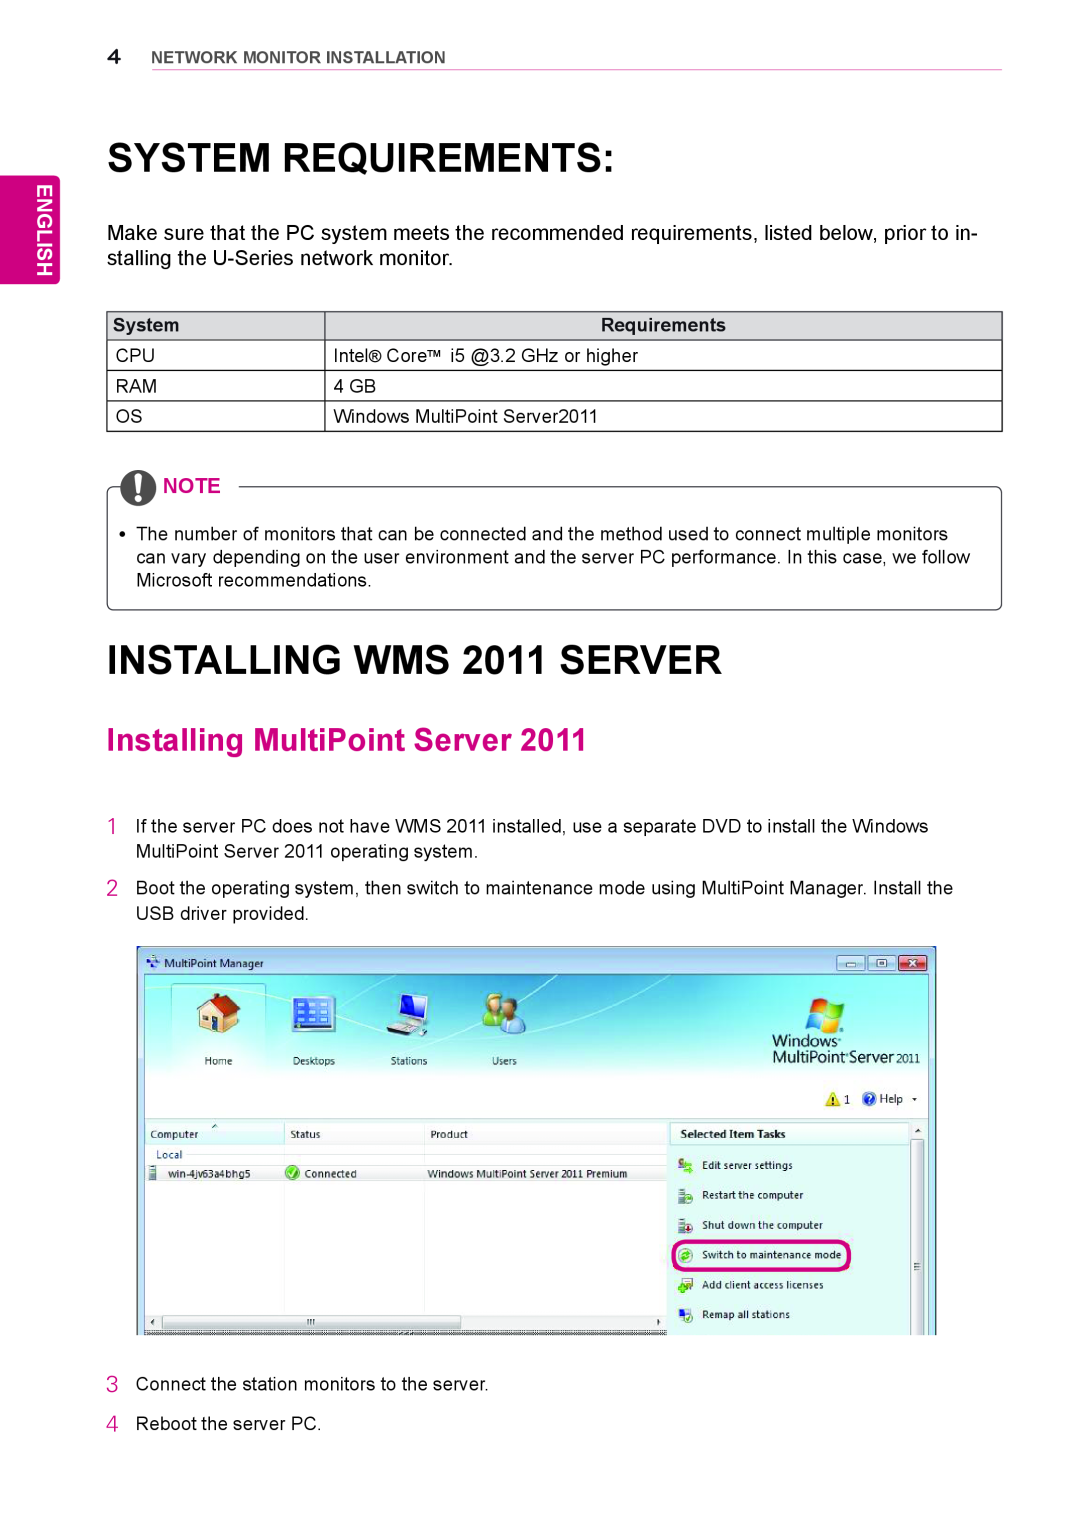 LG Electronics N195WU System Requirements, INSTALLING WMS 2011 SERVER, Installing MultiPoint Server, English 